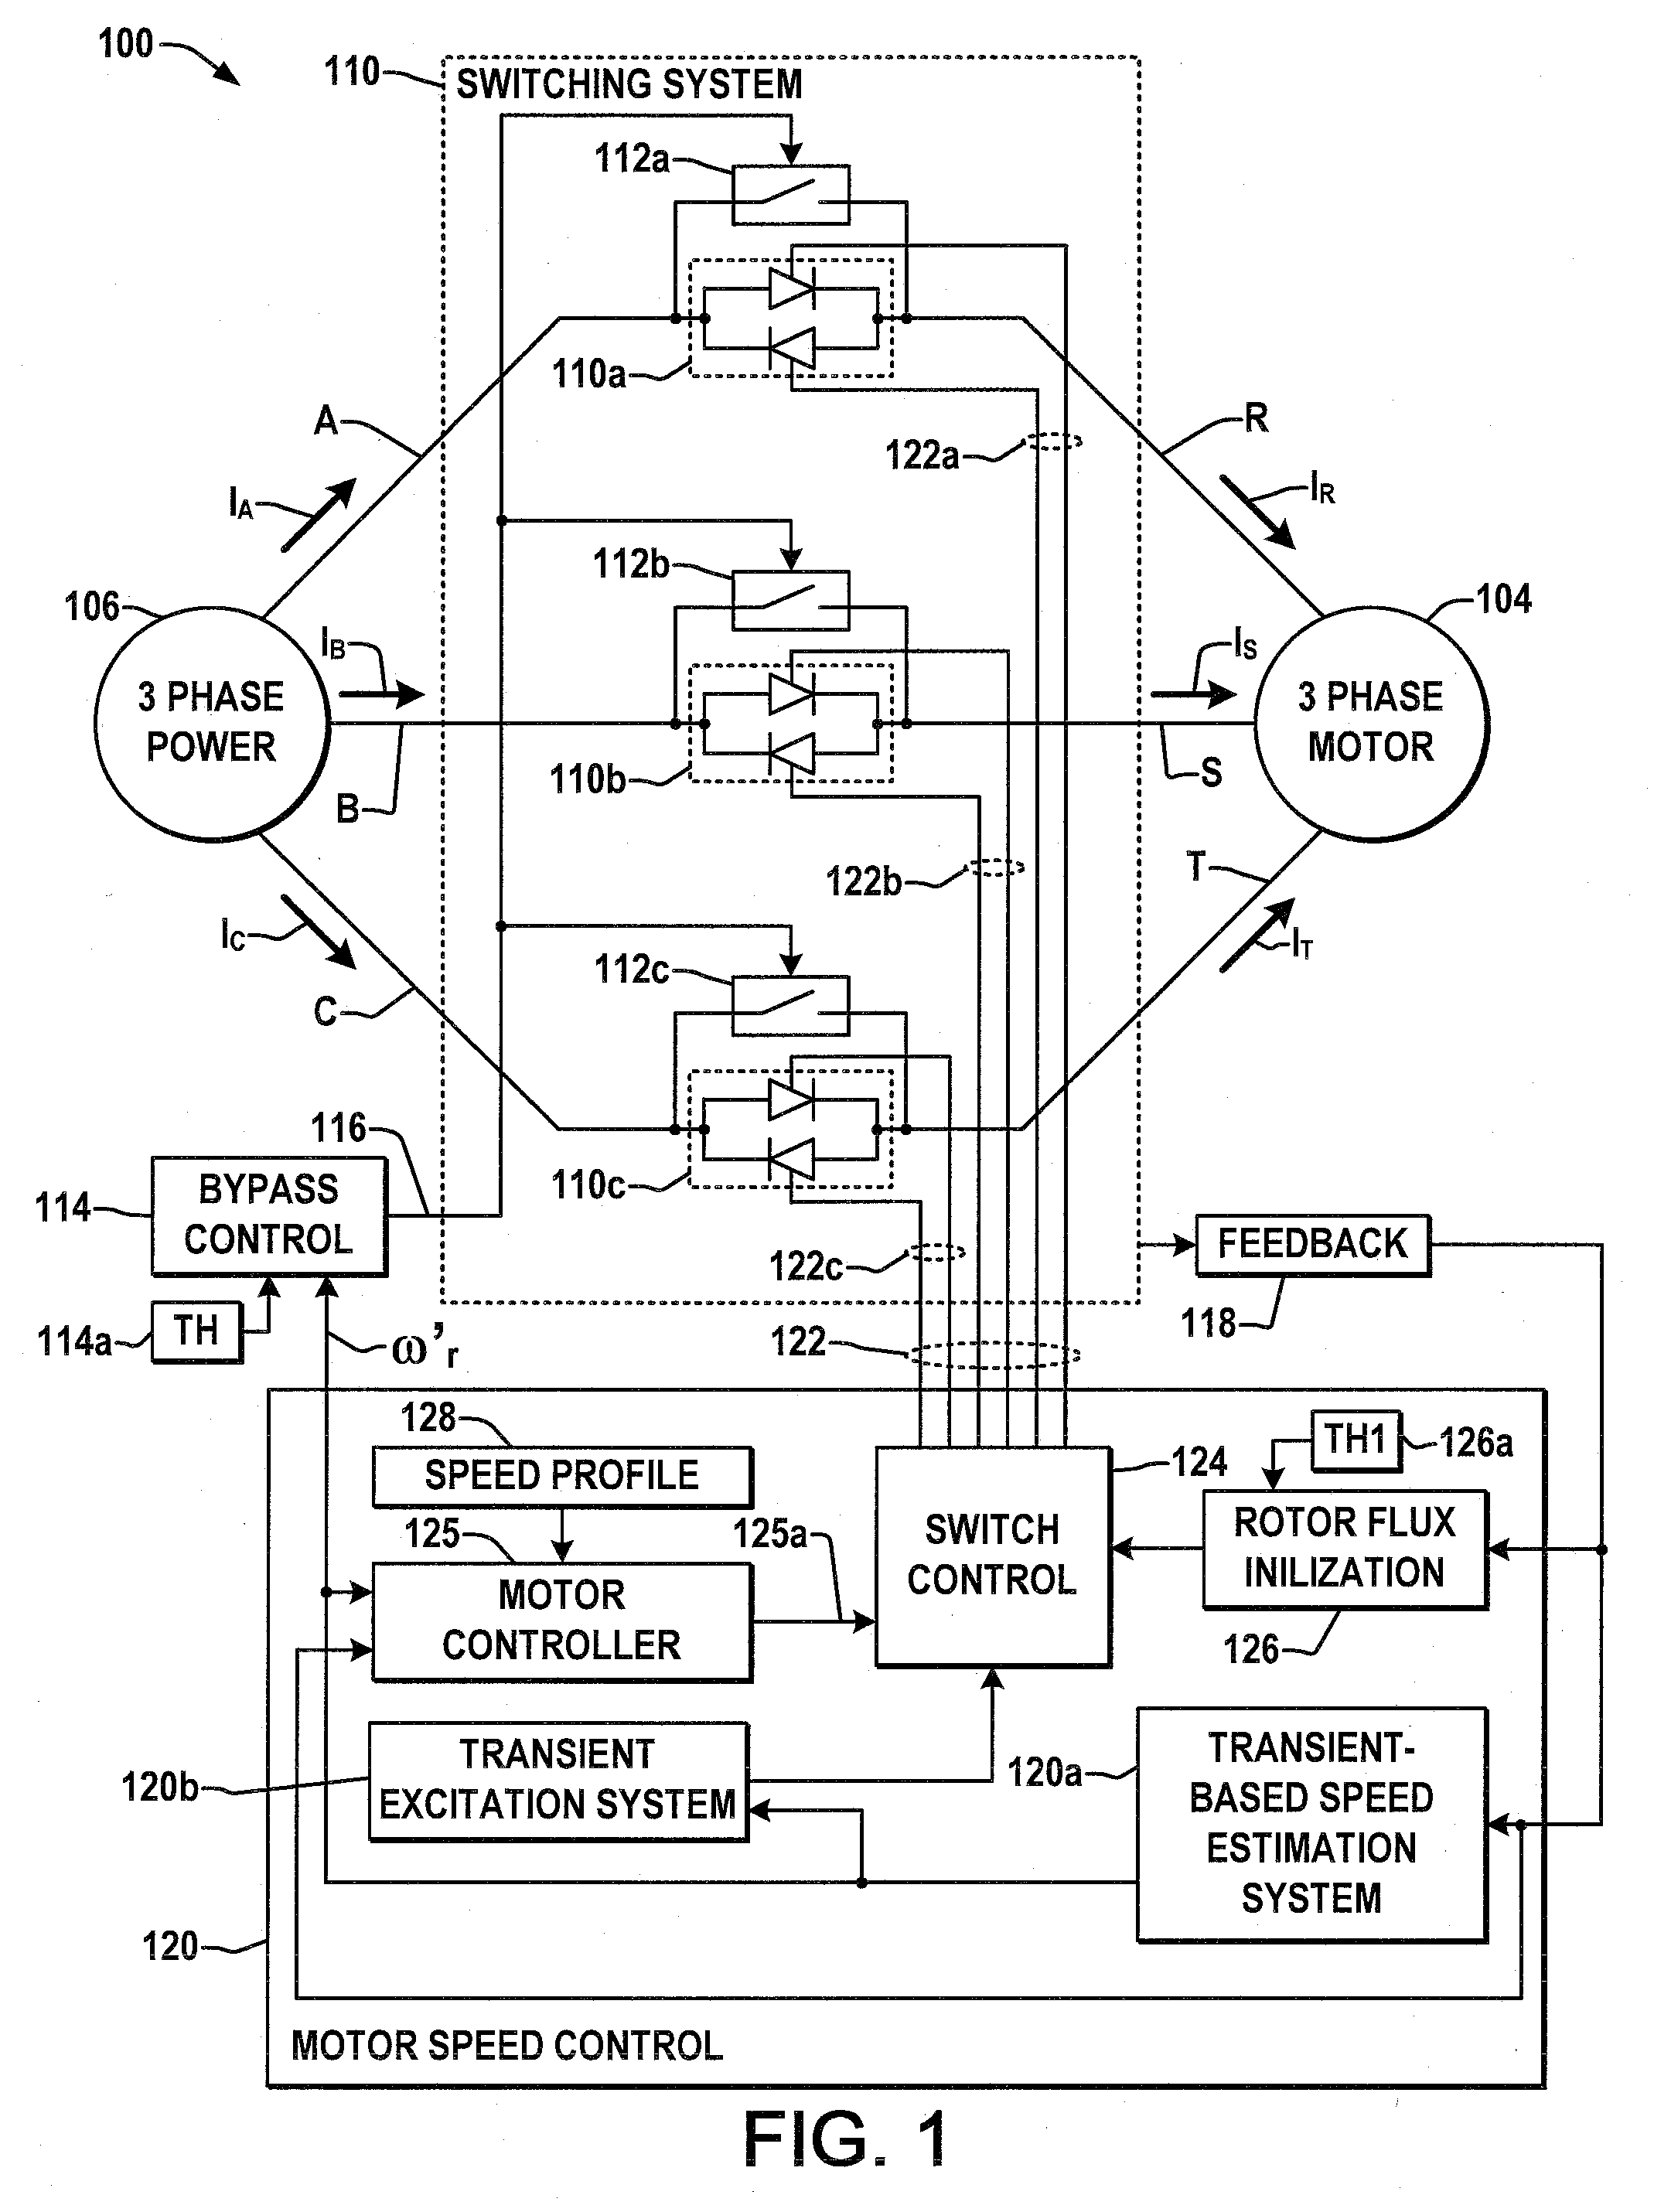 System and method for transient-based motor speed estimation with transient excitation